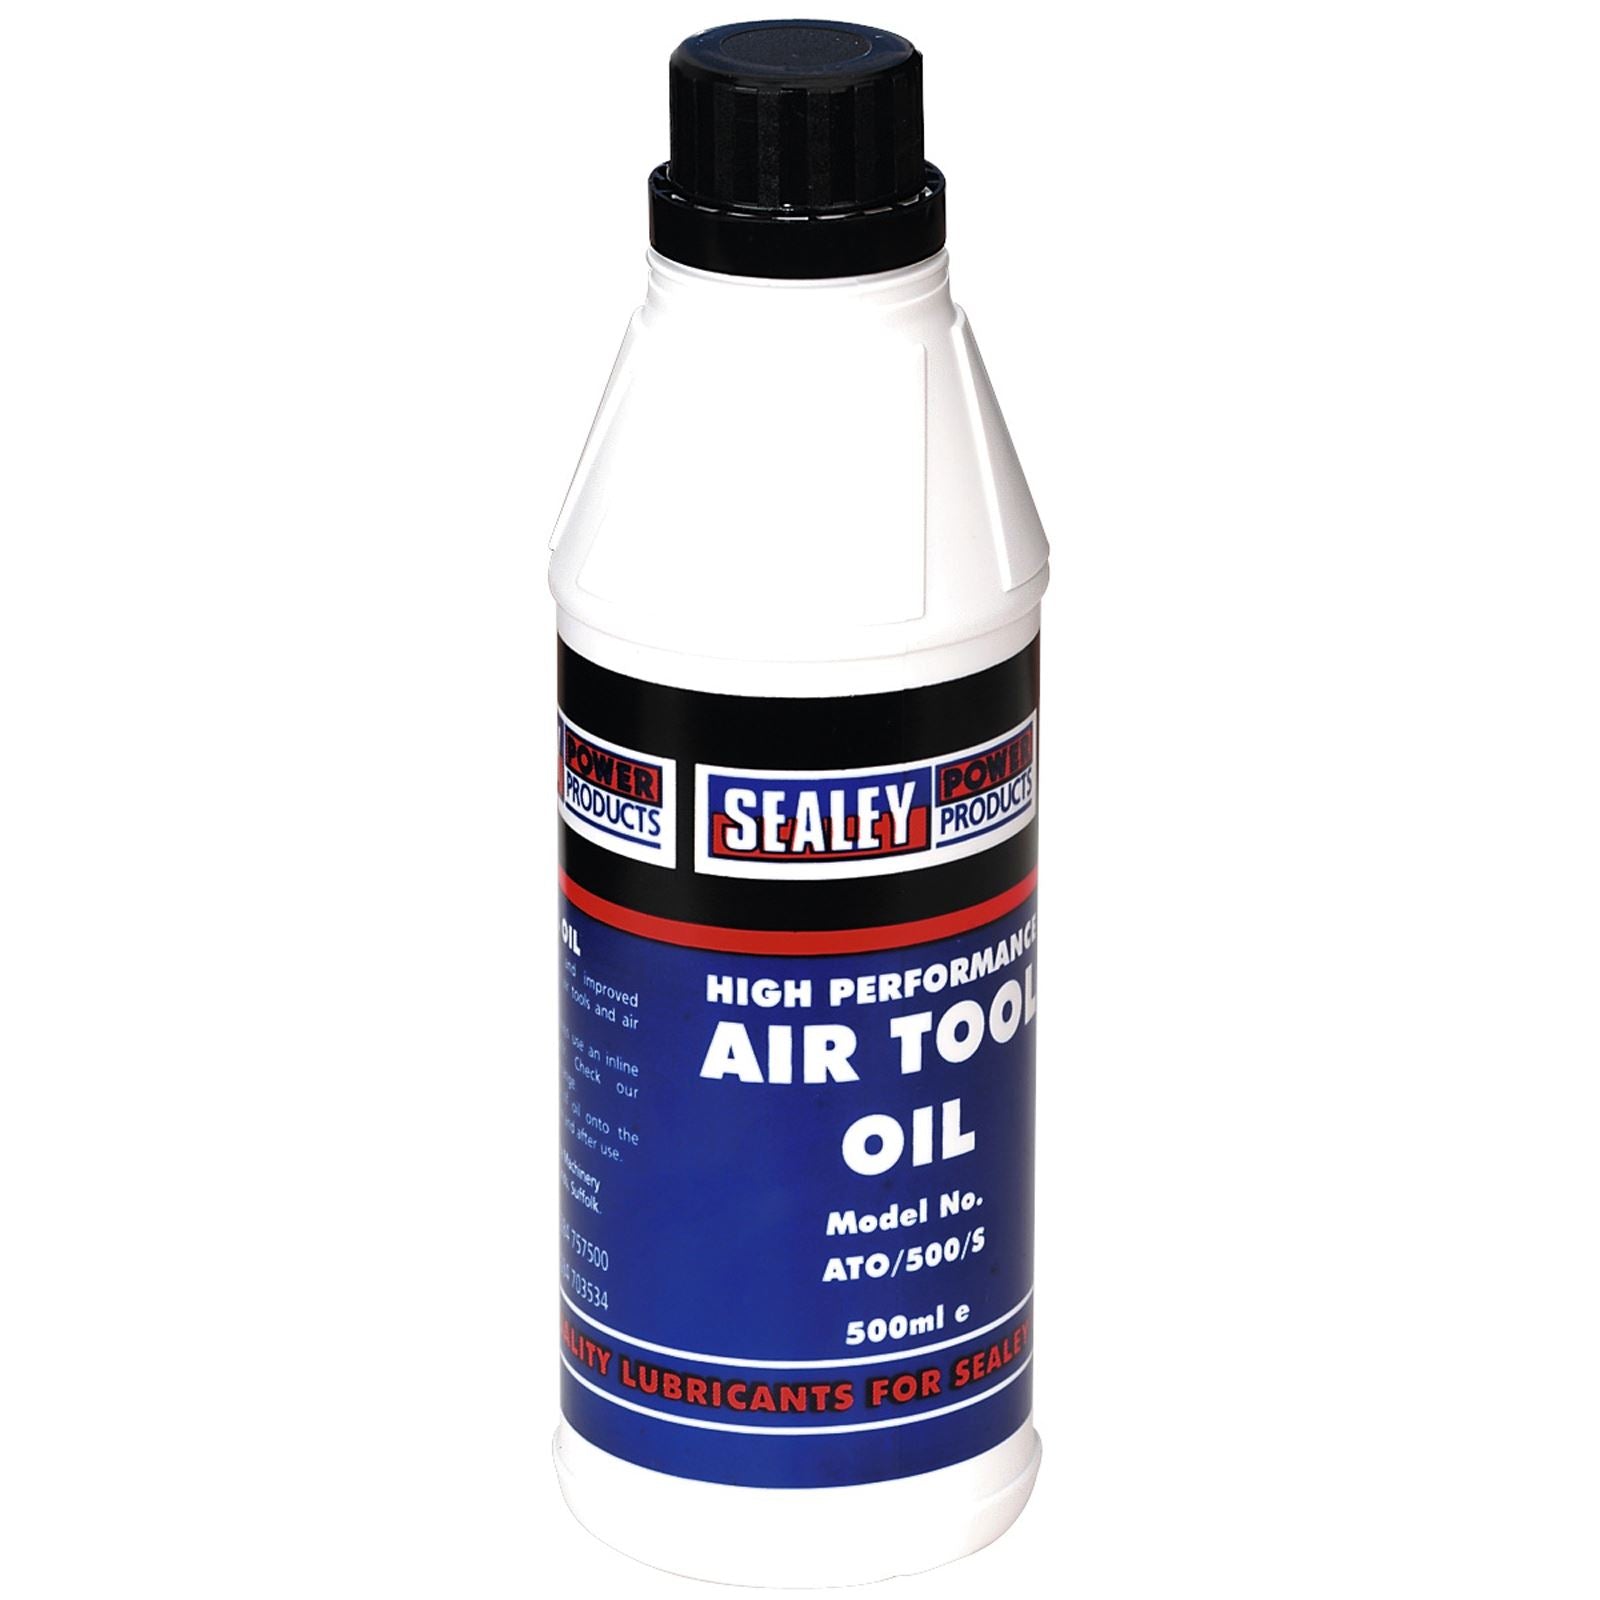 Sealey 500ml High Performance Air Tool Oil Lubricant Airline Tools Maintain